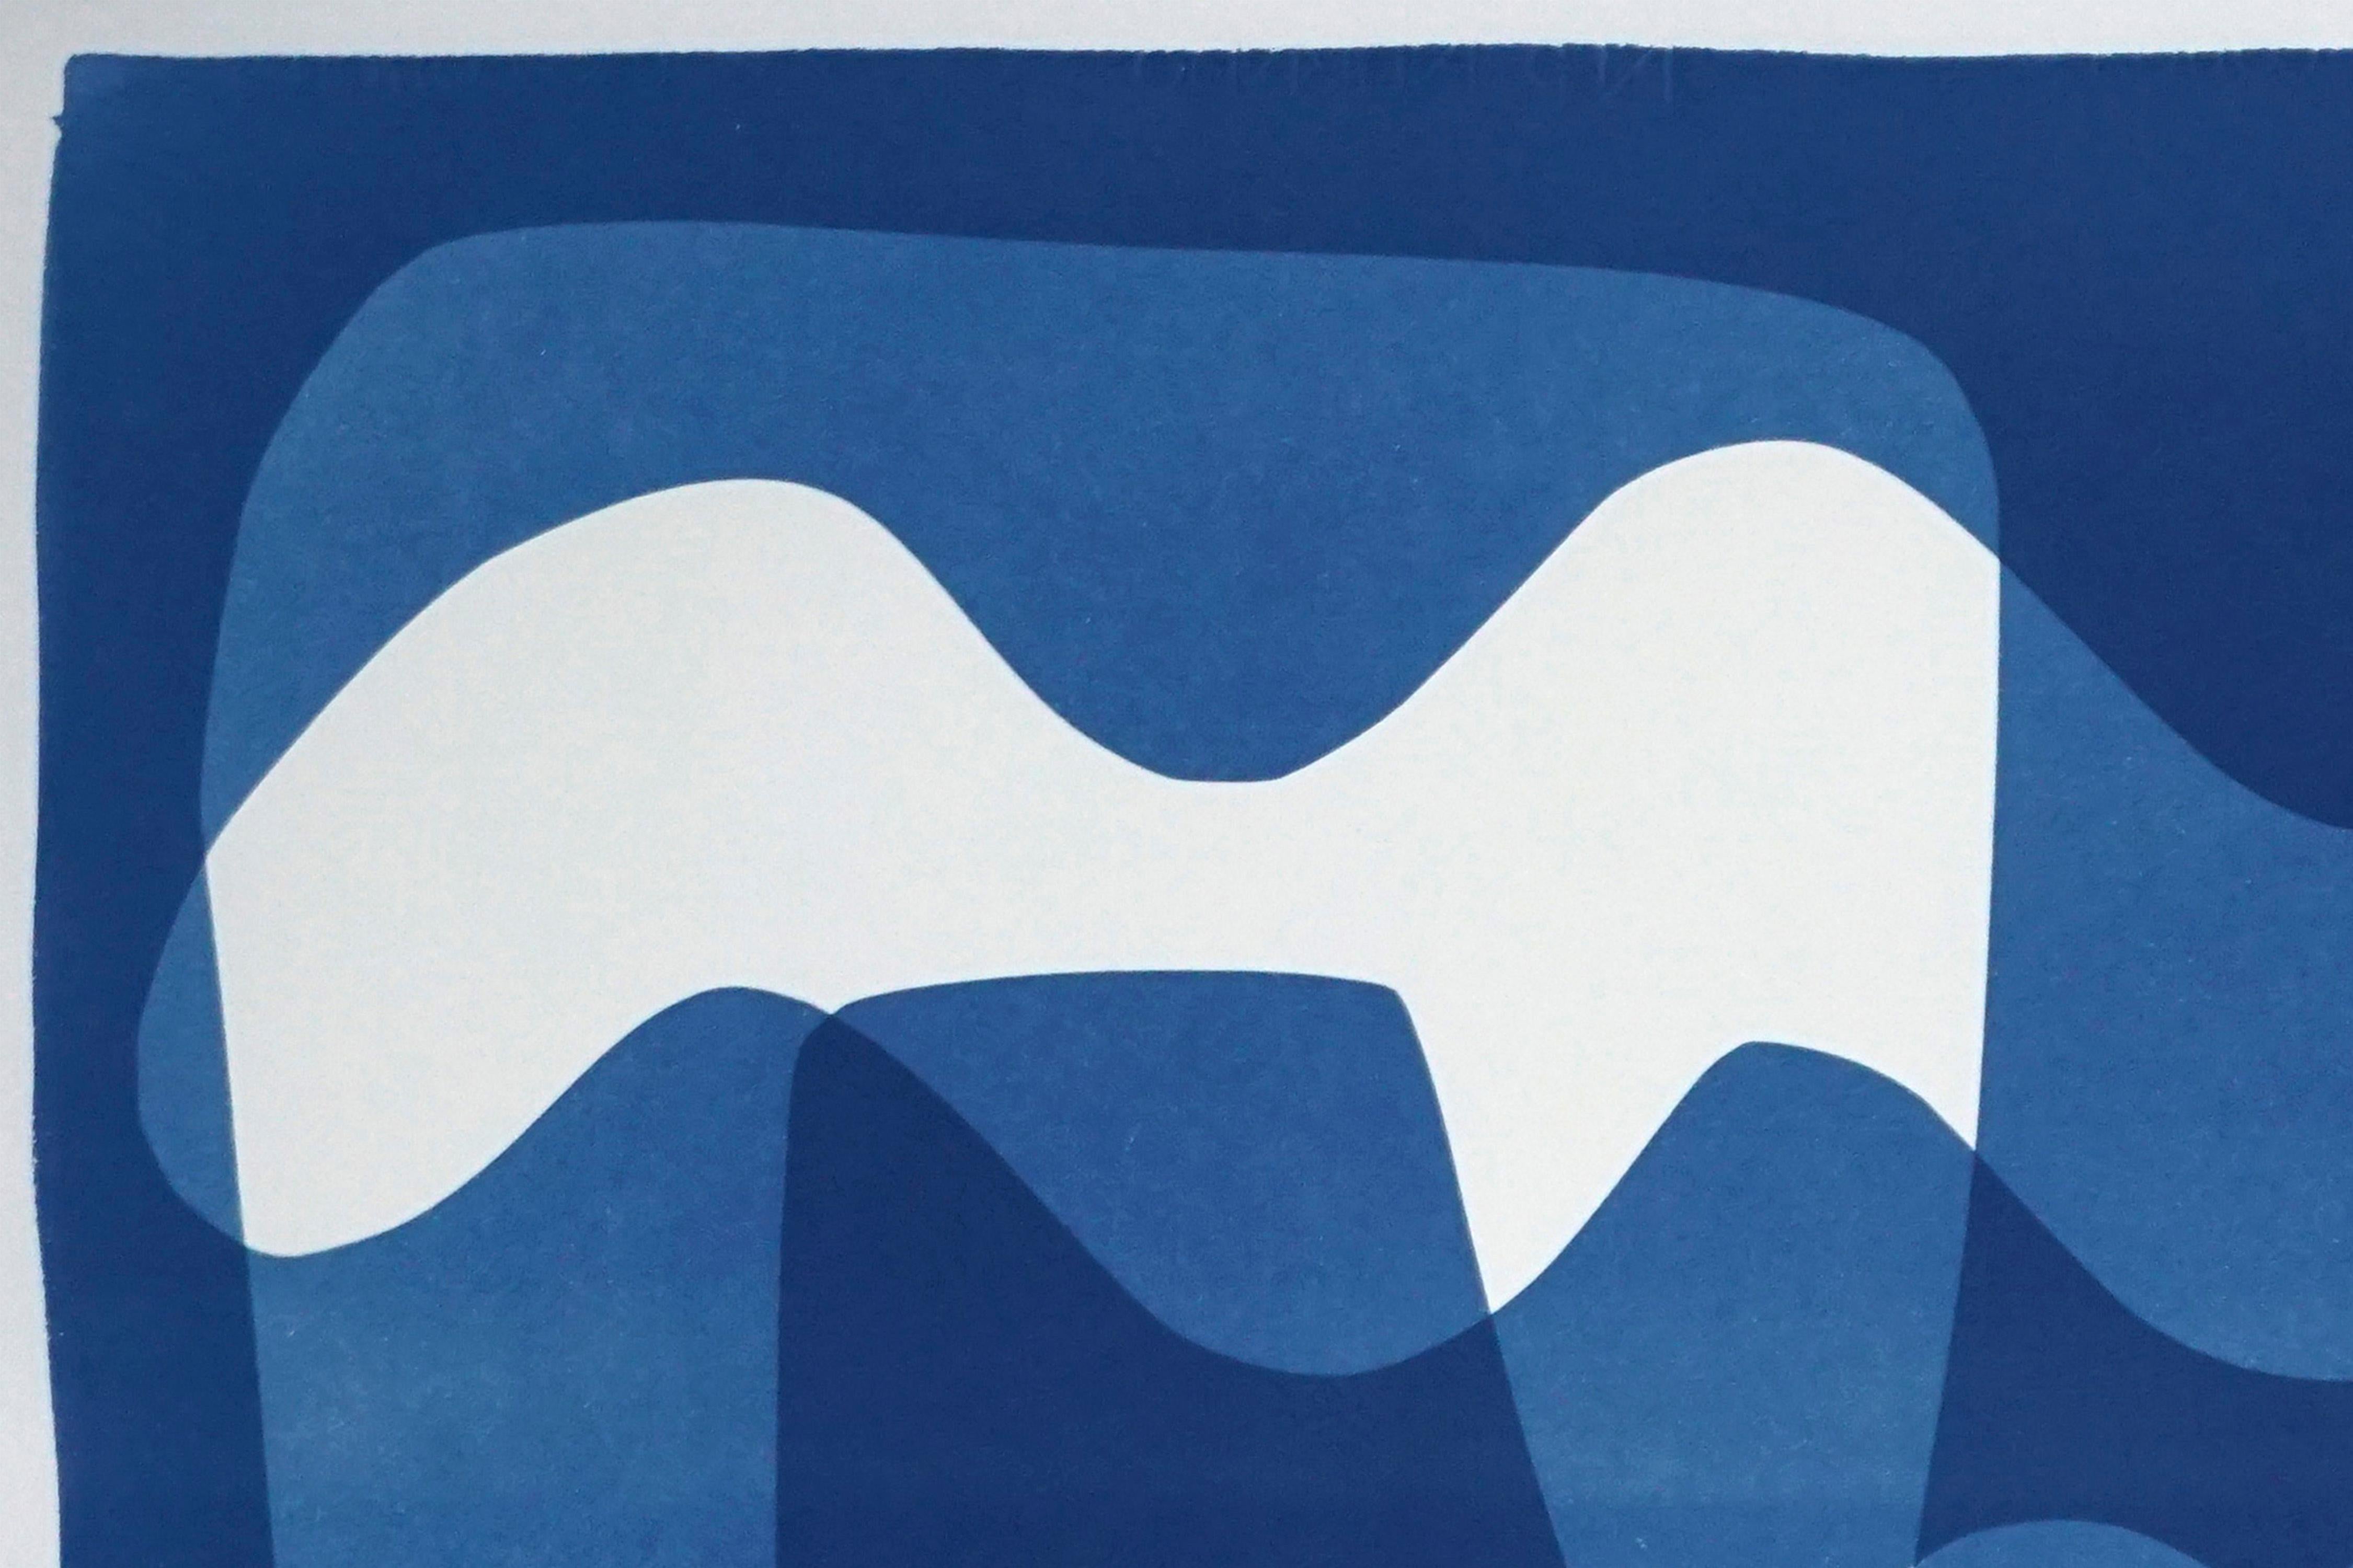 Modern Mid-Century Cutout Shapes in Blue Tones, Original Cyanotype, Abstract  2